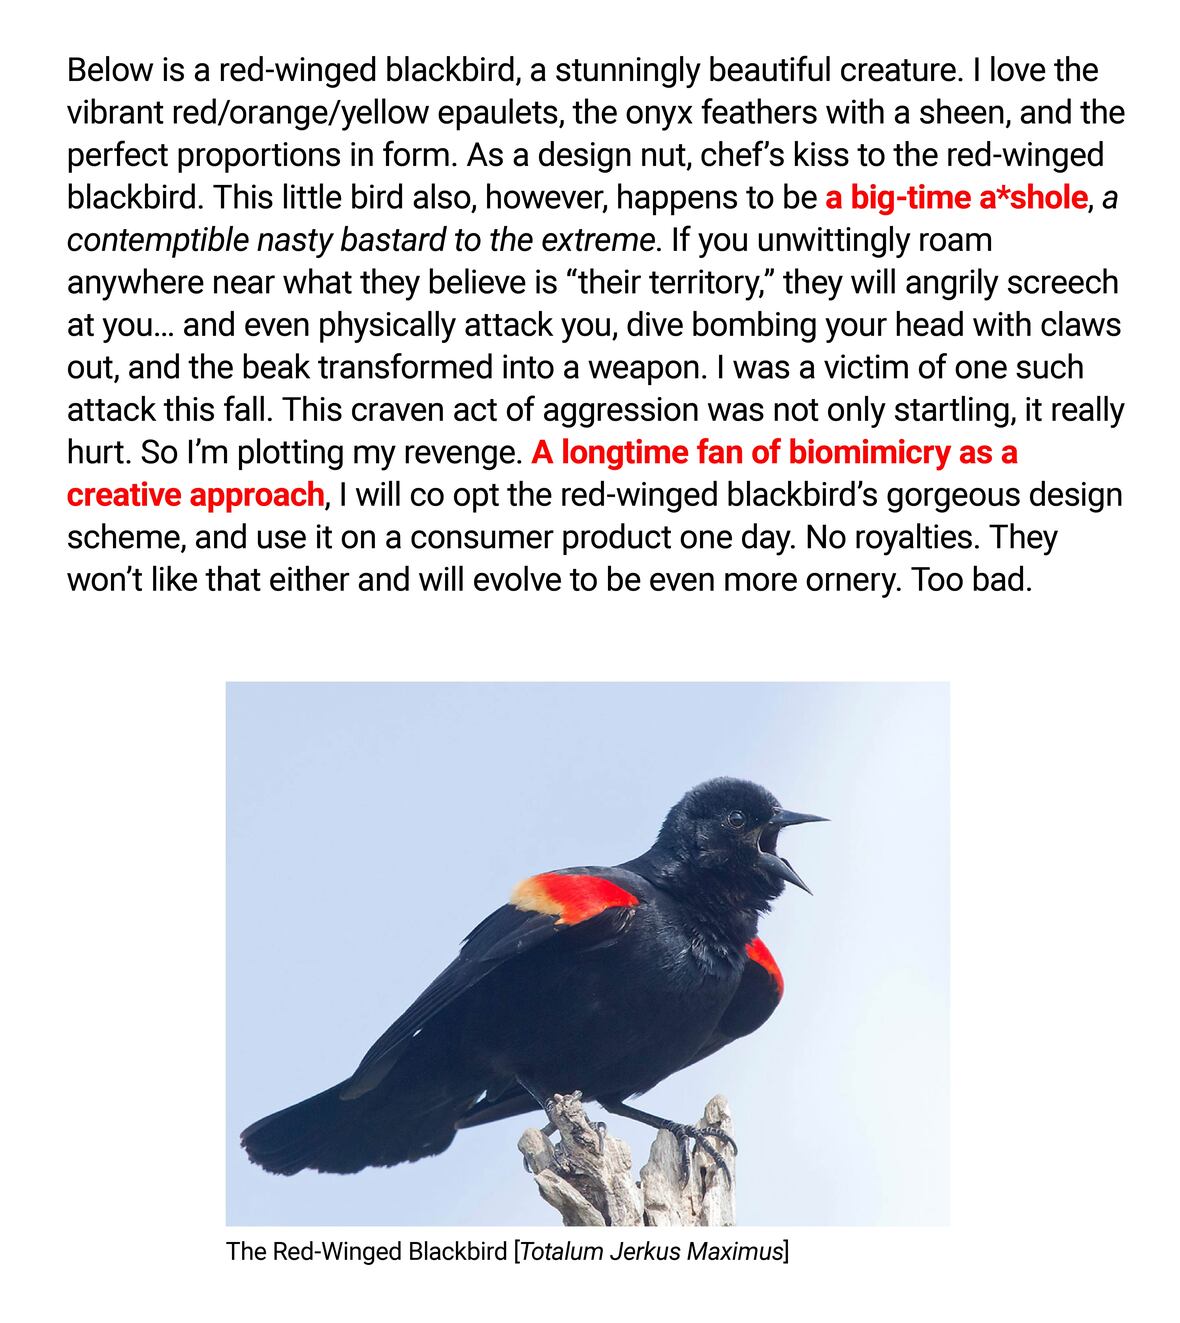 
The image shows a piece of text and a photograph of a bird. The text reads:

"Below is a red-winged blackbird, a stunningly beautiful creature. I love the vibrant red/orange/yellow epaulets, the onyx feathers with a sheen, and the perfect proportions in form. As a design nut, chef’s kiss to the red-winged blackbird. This little bird also, however, happens to be a big-time a*shole, a contemptible nasty bastard to the extreme. If you unwittingly roam anywhere near what they believe is “their territory,” they will angrily screech at you... and even physically attack you, dive bombing your head with claws out, and the beak transformed into a weapon. I was a victim of one such attack this fall. This craven act of aggression was not only startling, it really hurt. So I’m plotting my revenge. A longtime fan of biomimicry as a creative approach, I will co opt the red-winged blackbird’s gorgeous design scheme, and use it on a consumer product one day. No royalties. They won’t like that either and will evolve to be even more ornery. Too bad."

The accompanying photograph shows a red-winged blackbird perched on a piece of wood, with its distinctive red and yellow shoulder patches visible against its glossy black body. The bird's mouth is open as if it is calling or singing. At the bottom, there is a caption that says "The Red-Winged Blackbird [Totalum Jerkus Maximus]".